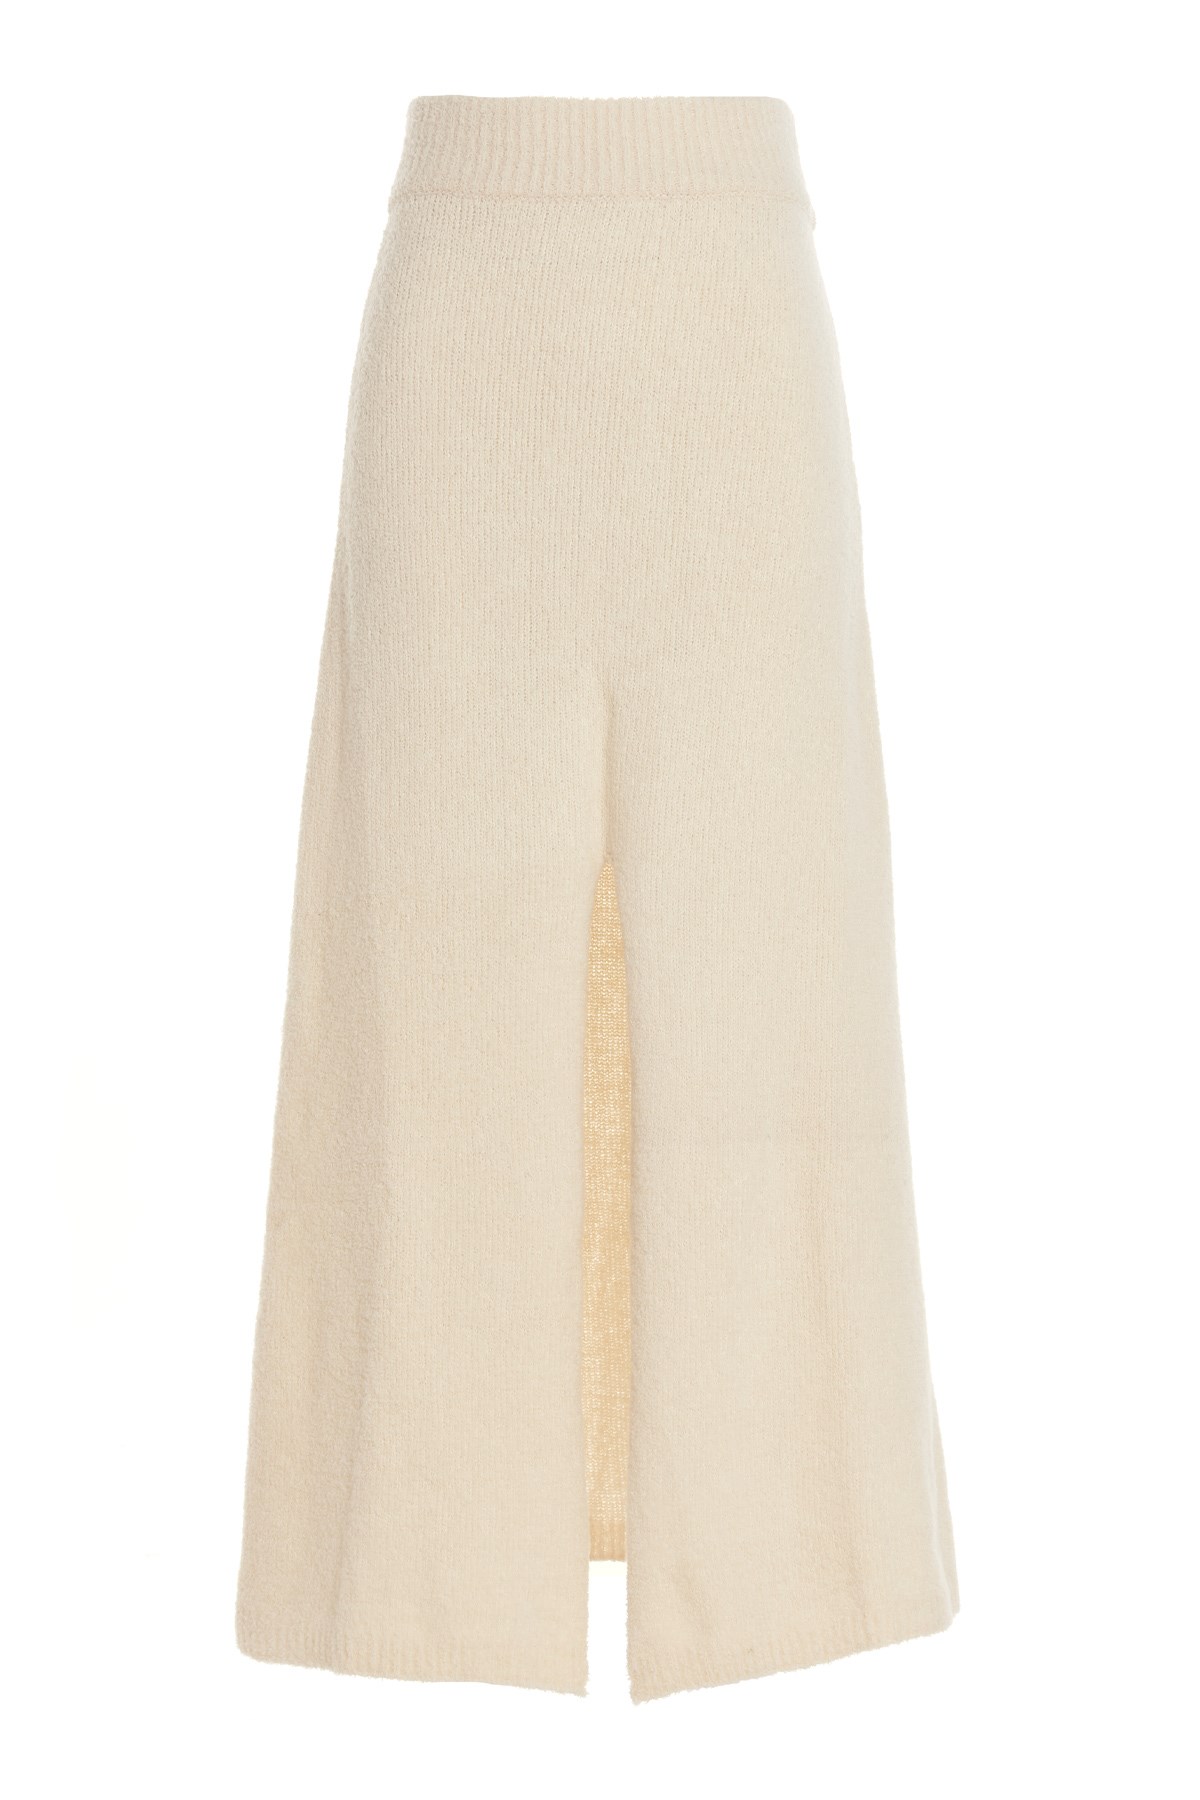 CANESSA Knitted Skirt With A Slit